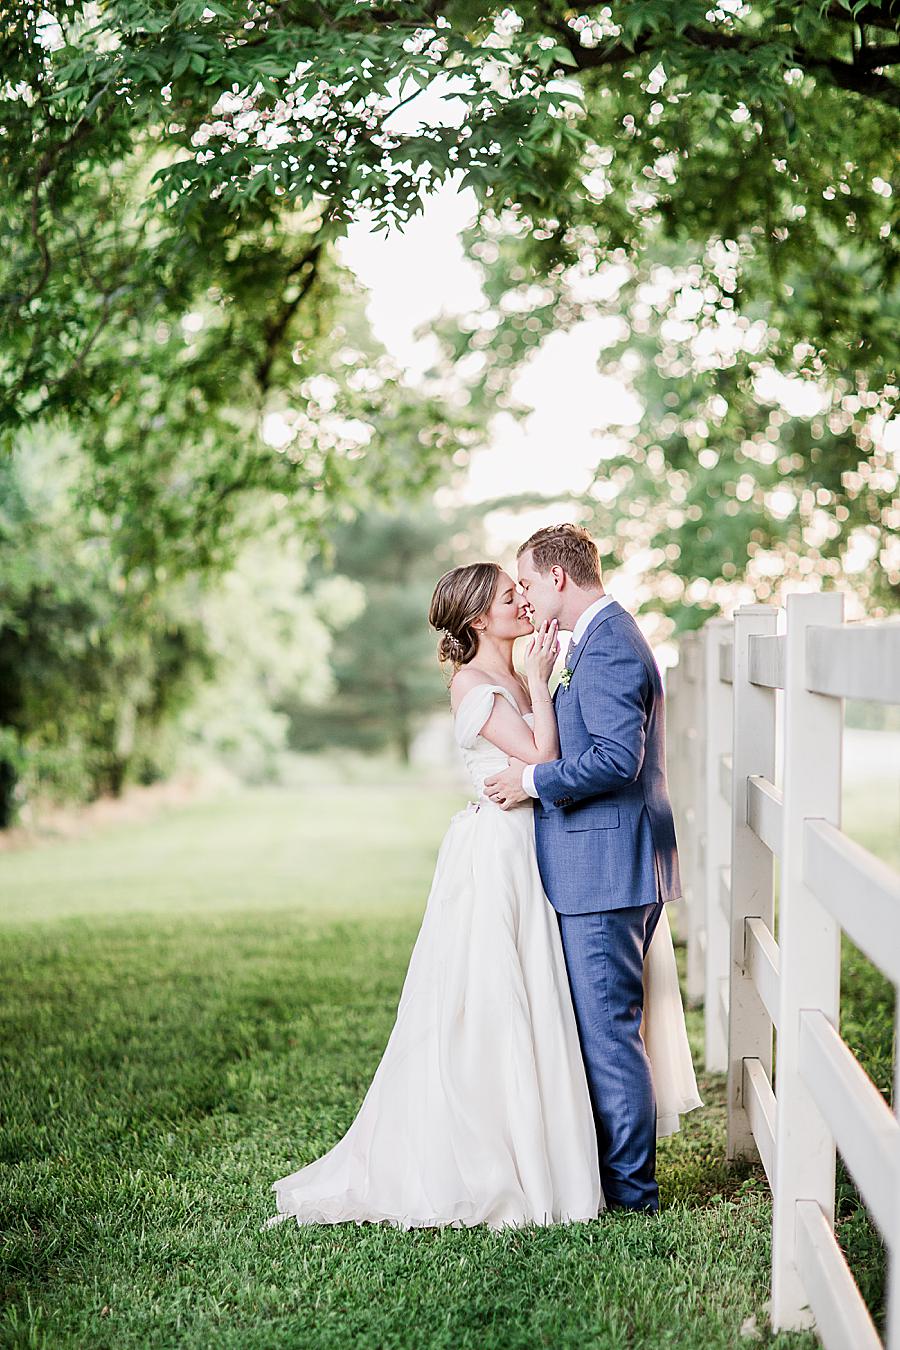 Sunset photos at this Marblegate Farm Wedding by Knoxville Wedding Photographer, Amanda May Photos.